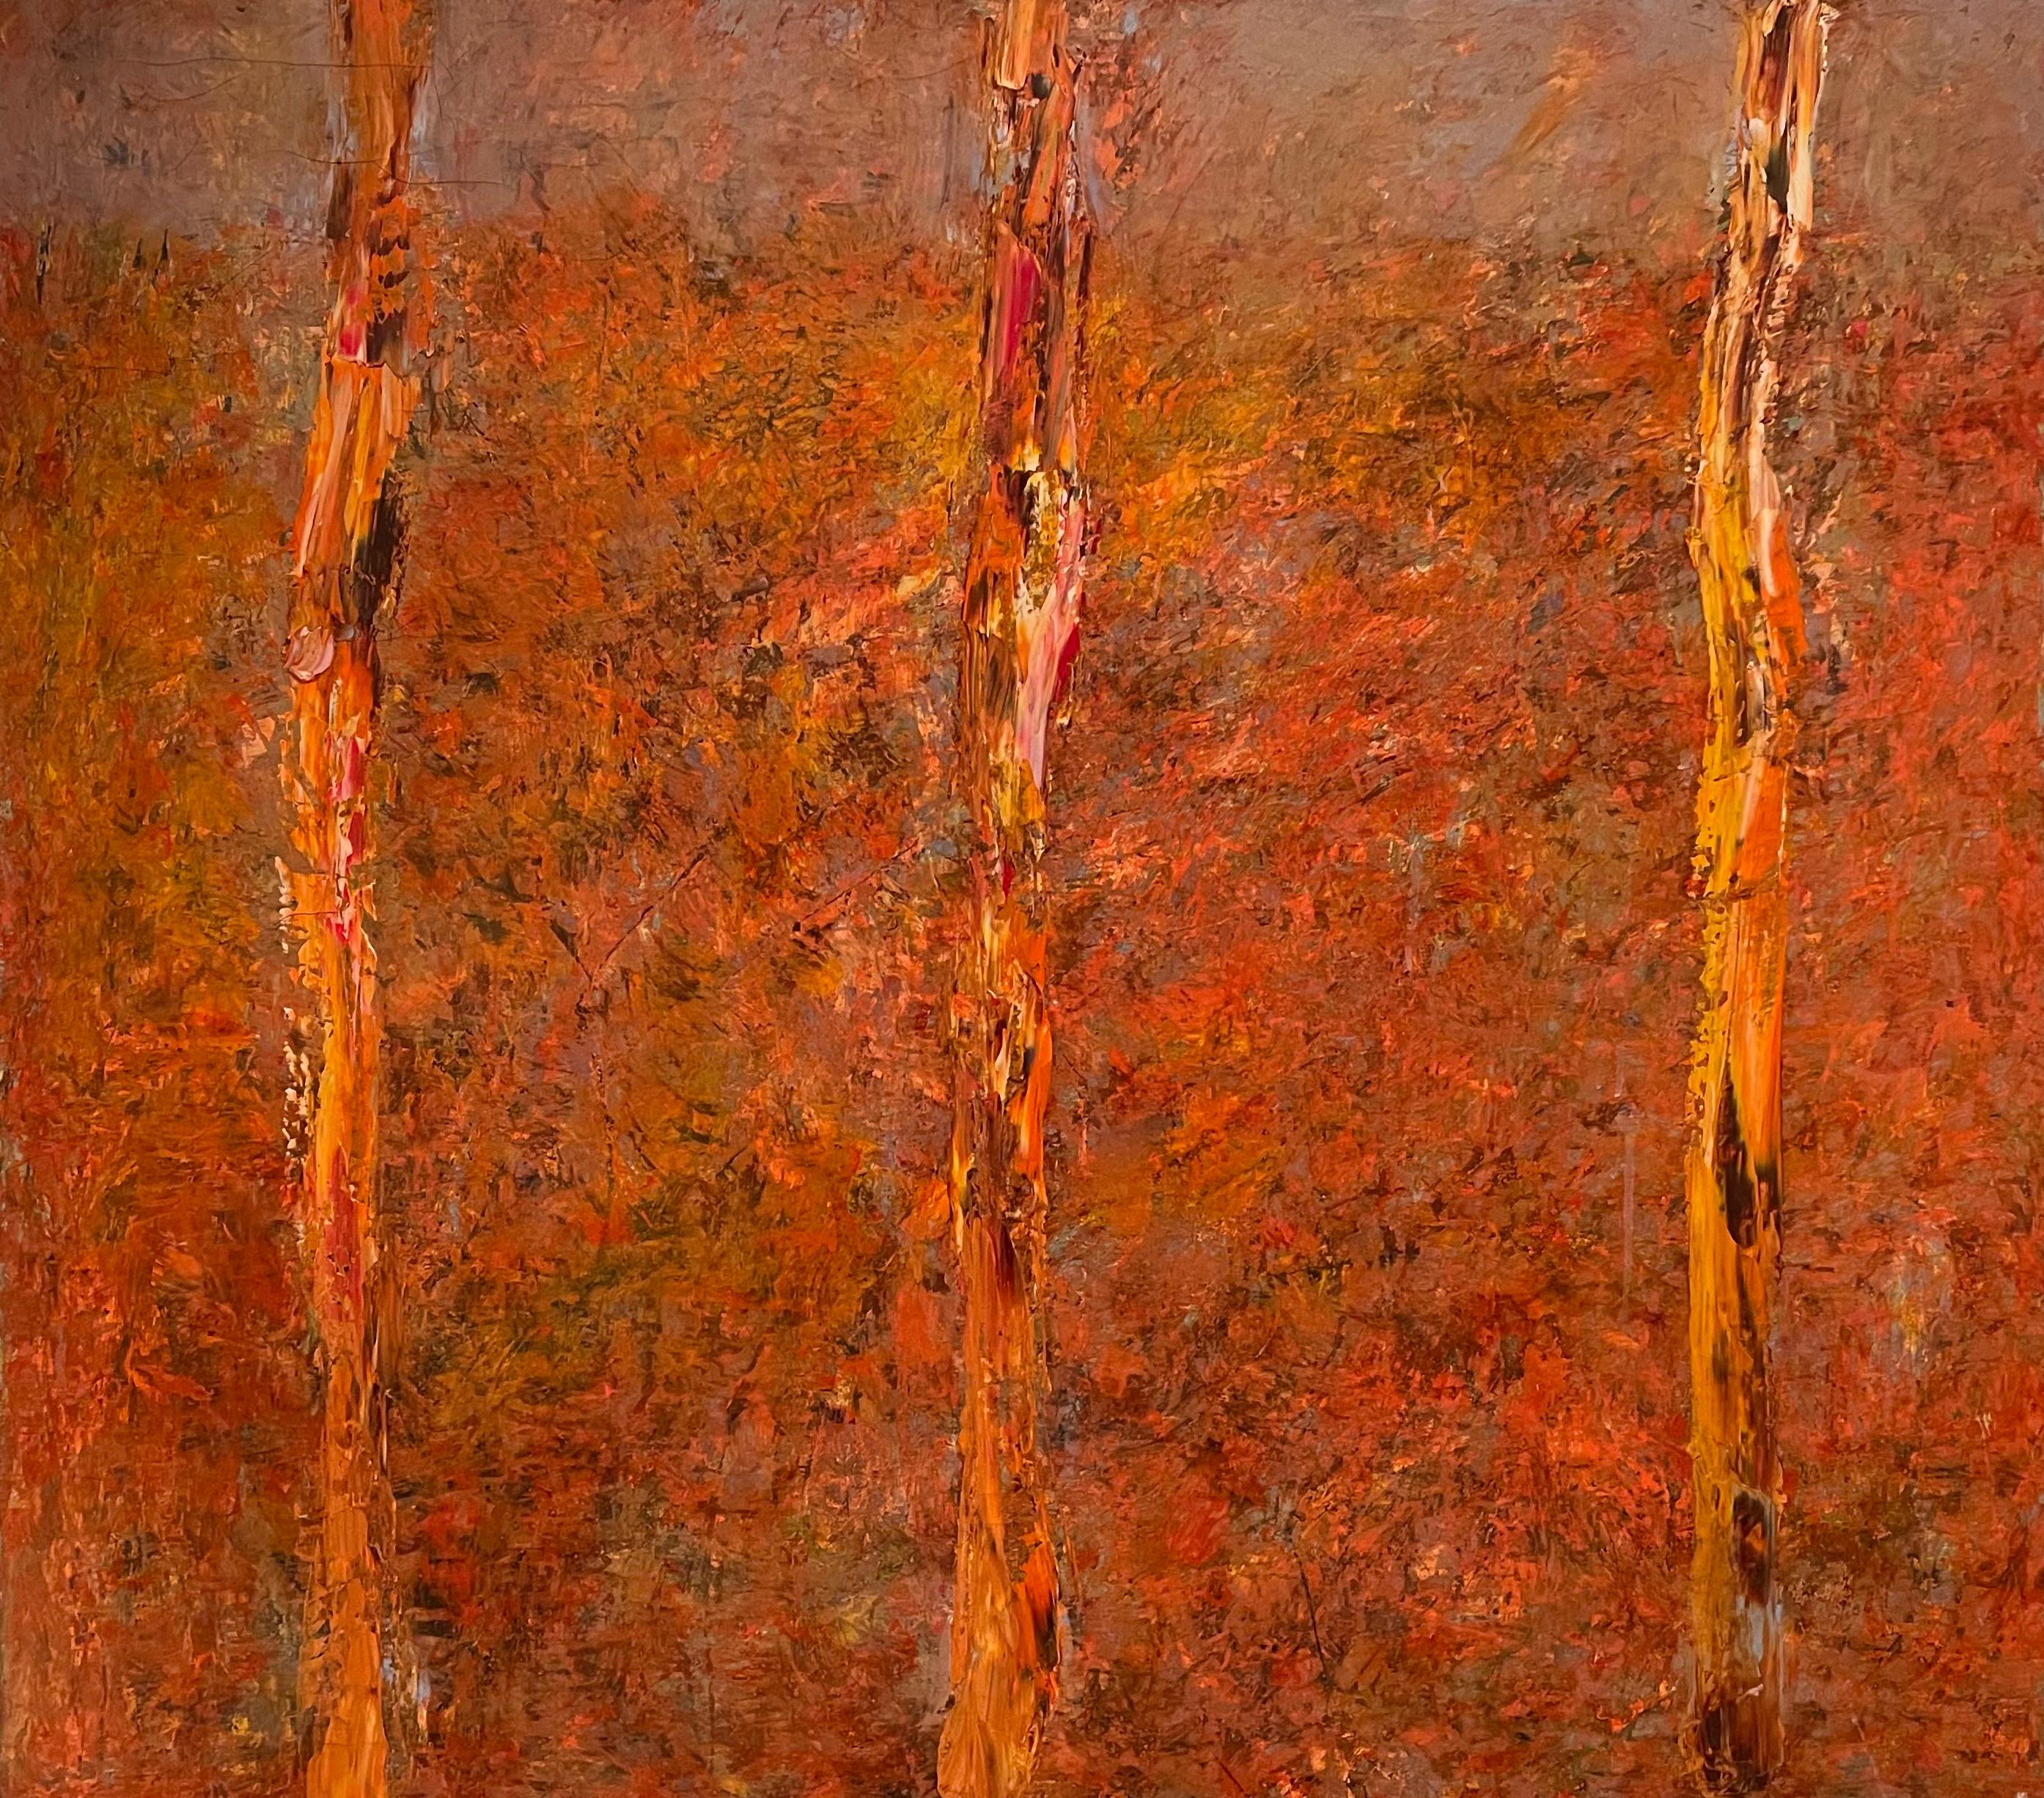 David Leviathan Abstract Painting – "Trunks" Orange Contemporary Expressionist Landscape Abstract von Leviathan 